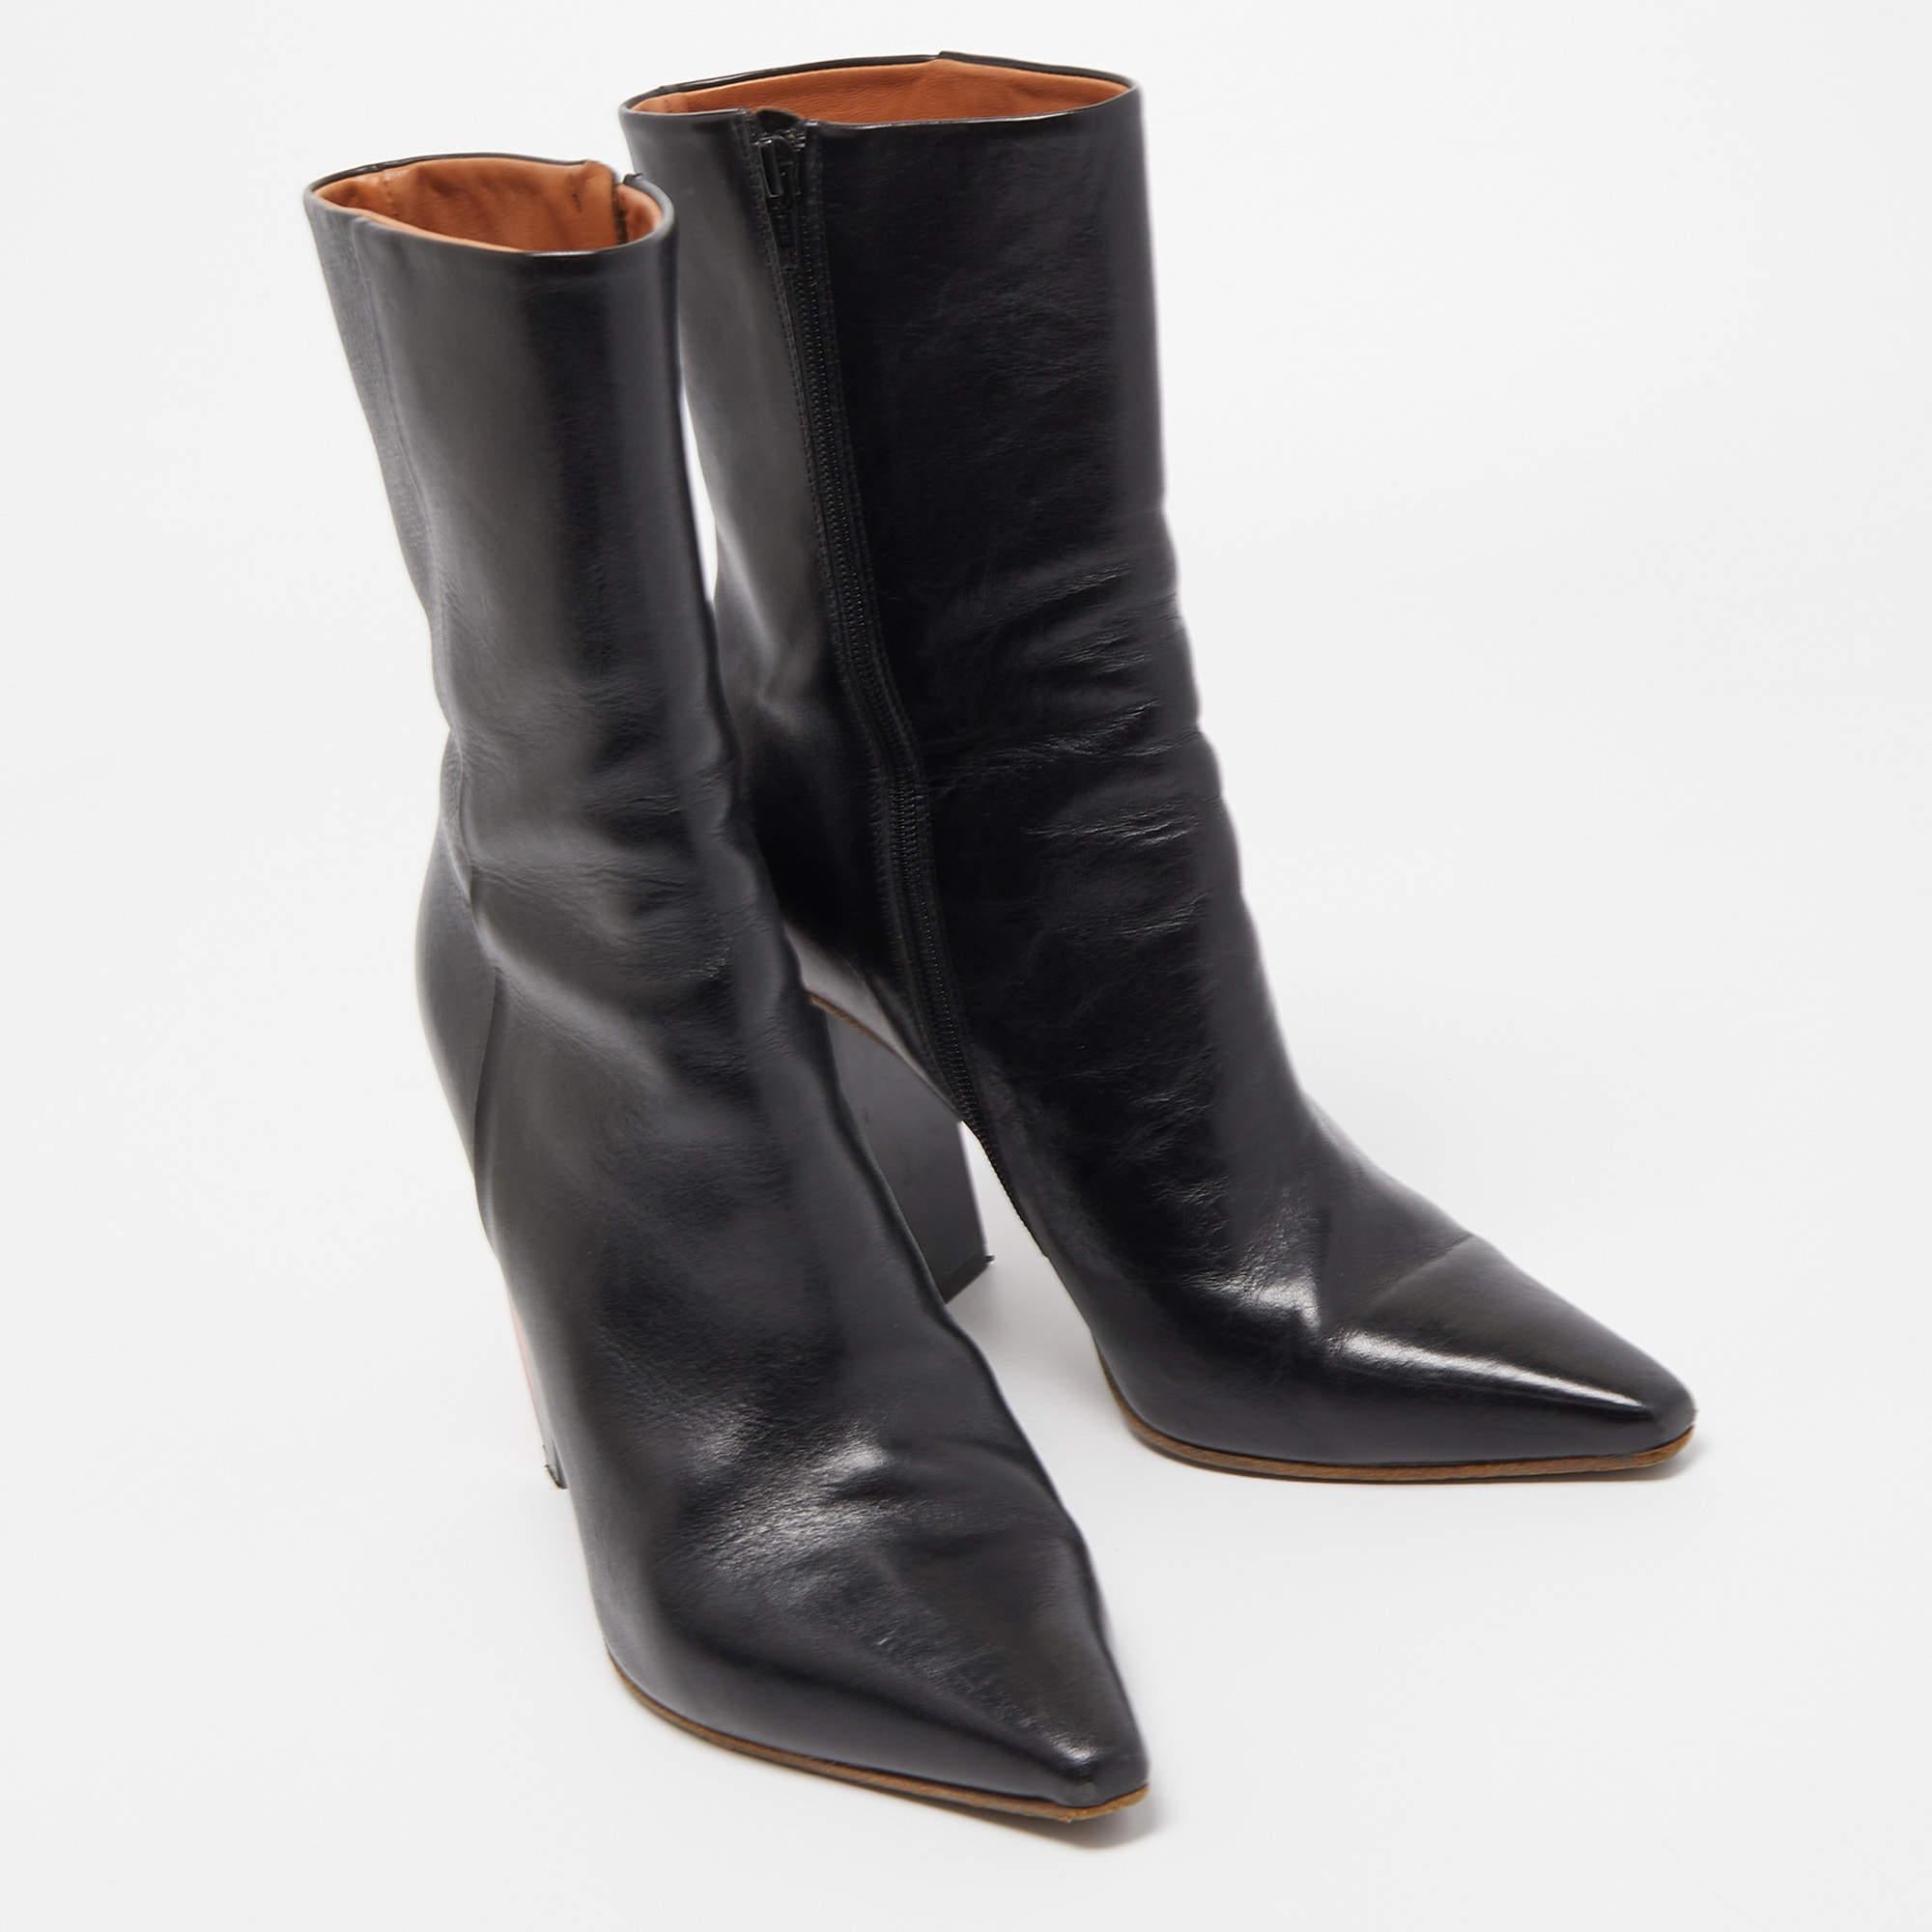 Meticulously designed into a smart silhouette, these boots are on-point with style. They come with comfortable insoles and durable outsoles to last you forever. These boots are just amazing, and you definitely need to get them right away.